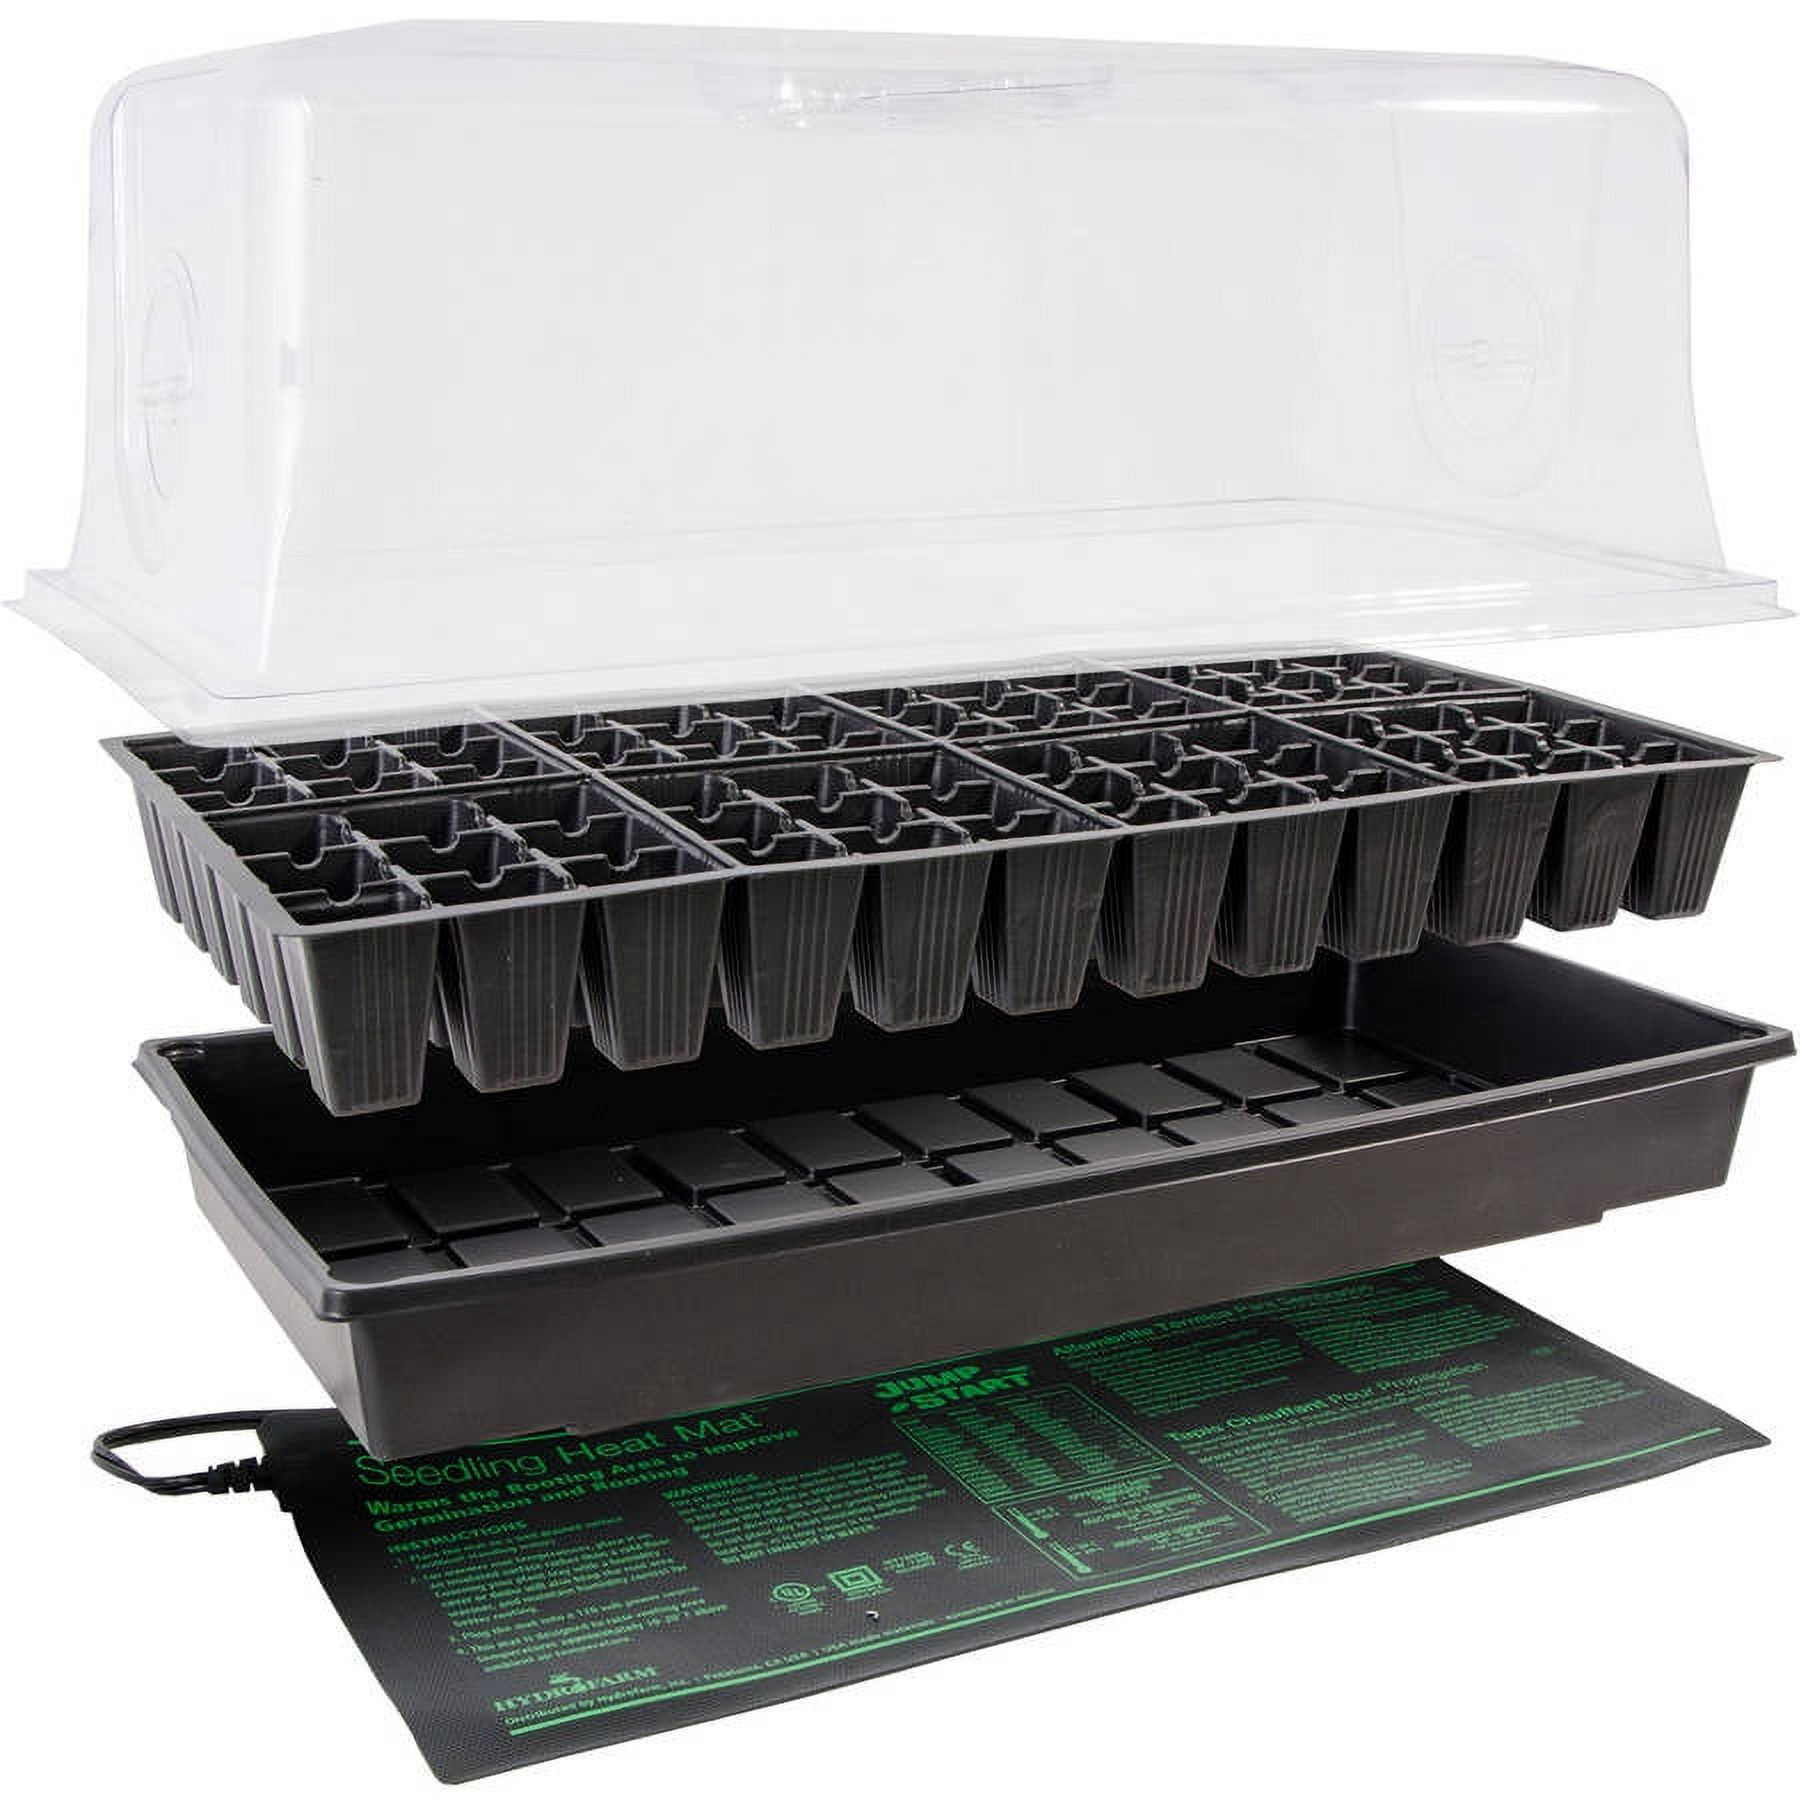 Jump Start CK64060 Germination Hot House with Heat Mat, Tray, Cell Insert & Dome - image 1 of 5